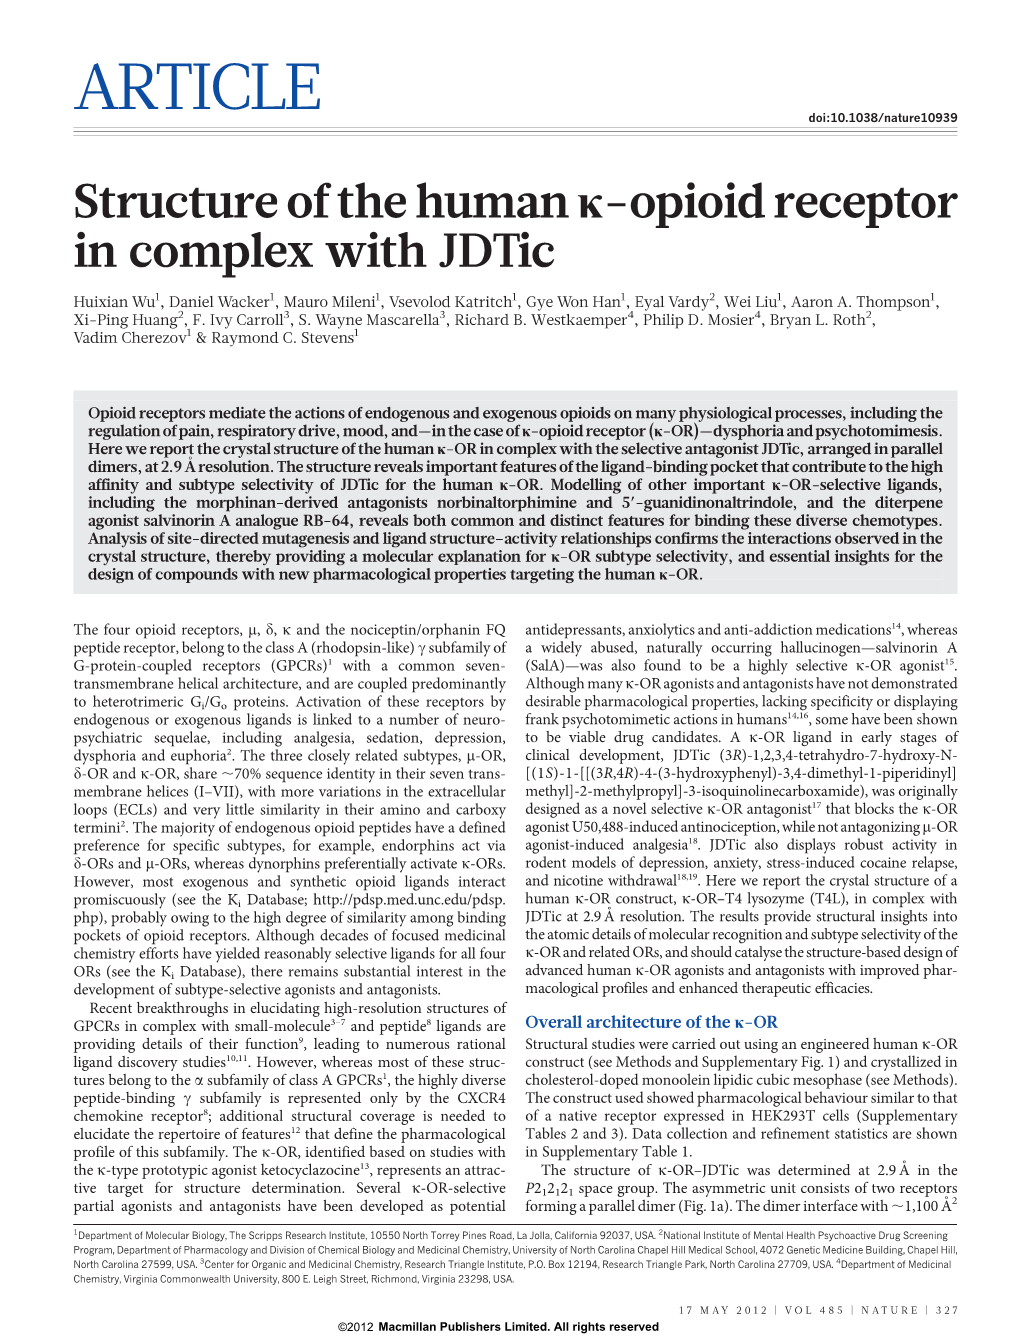 Structure of the Human Κ-Opioid Receptor in Complex with Jdtic